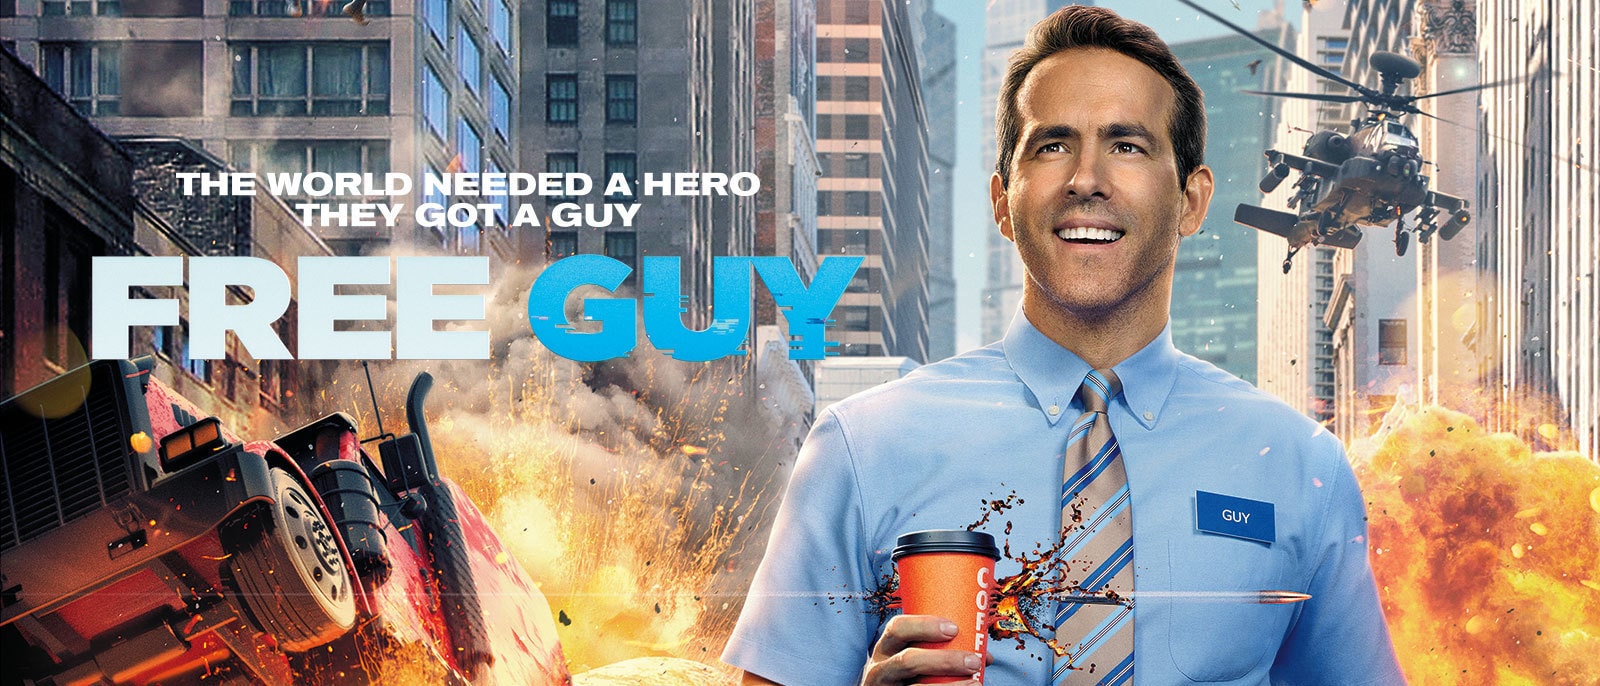 Free Guy Trailer Is Here And It Looks Amazing! | The Movie Blog